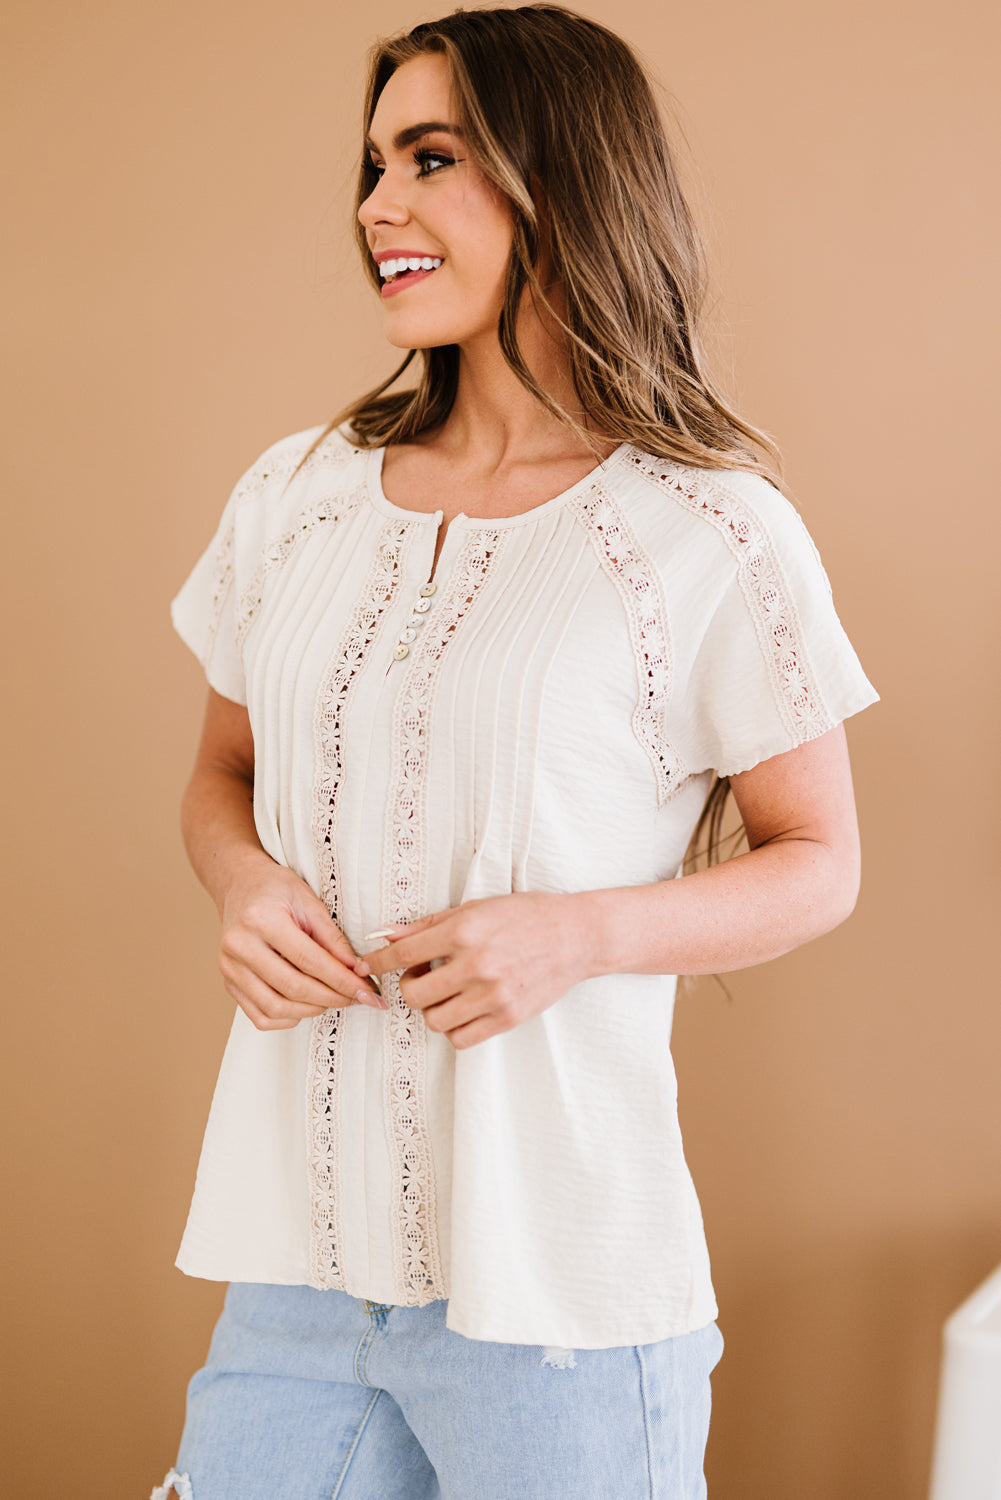 Cape May Crochet Lace Blouse